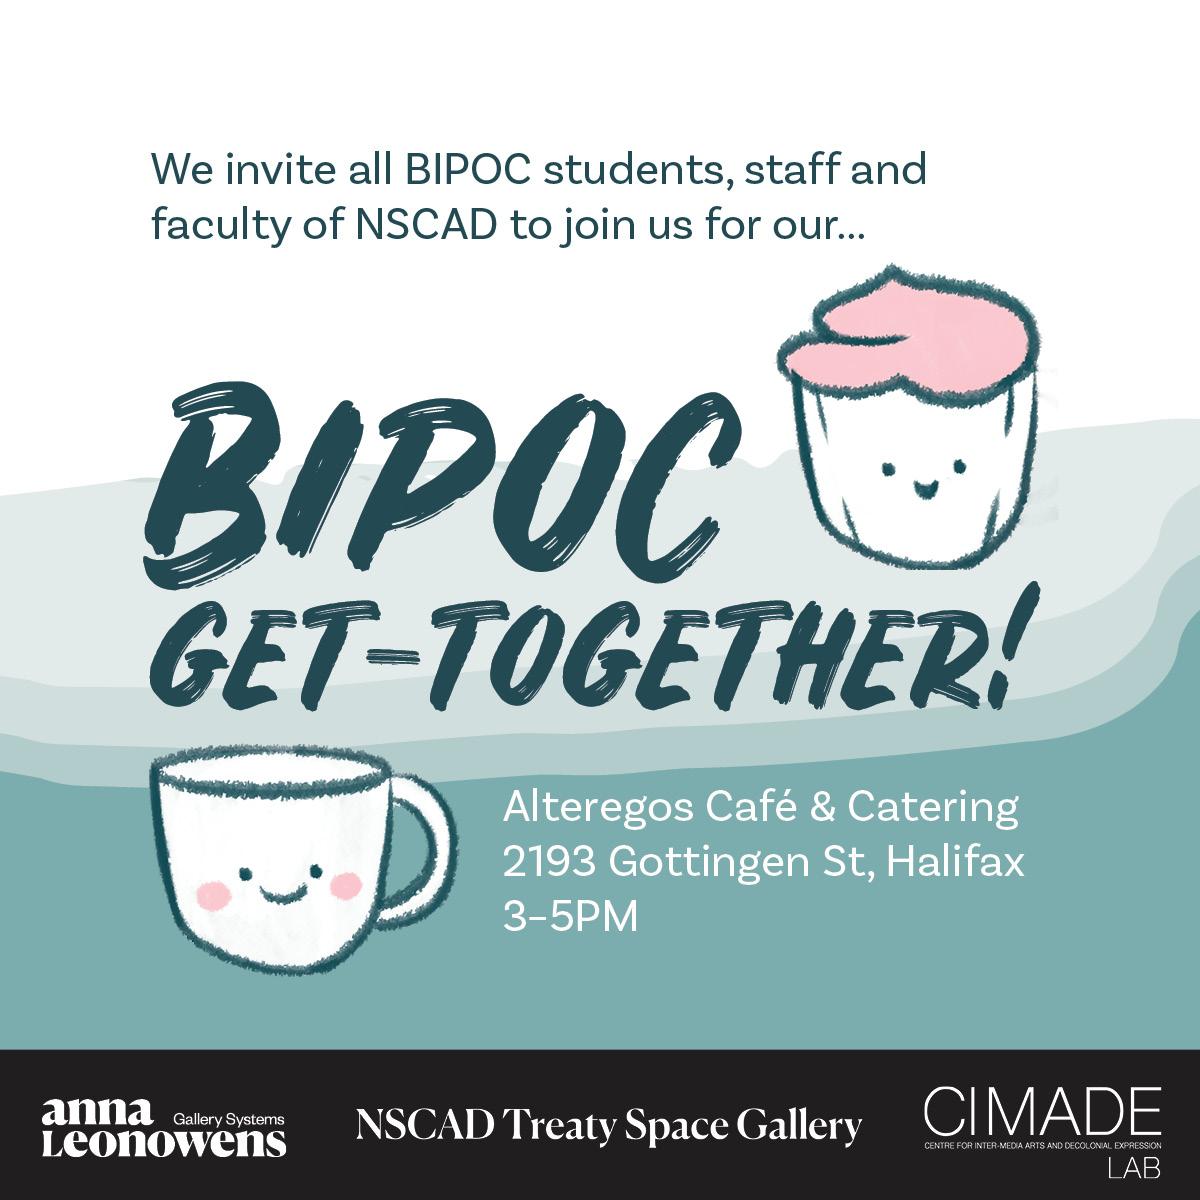 Image with light teal background and dark teal text reading " We invite all BIPOC students, staff, and faculty of NSCAD to join us for our BIPOC get-together. Alteregos Cafe & Catering 2193 Gottingen St Halifax. 3–5PM." Drawings of a coffee cup and cupcake with faces sit on either side of the text.